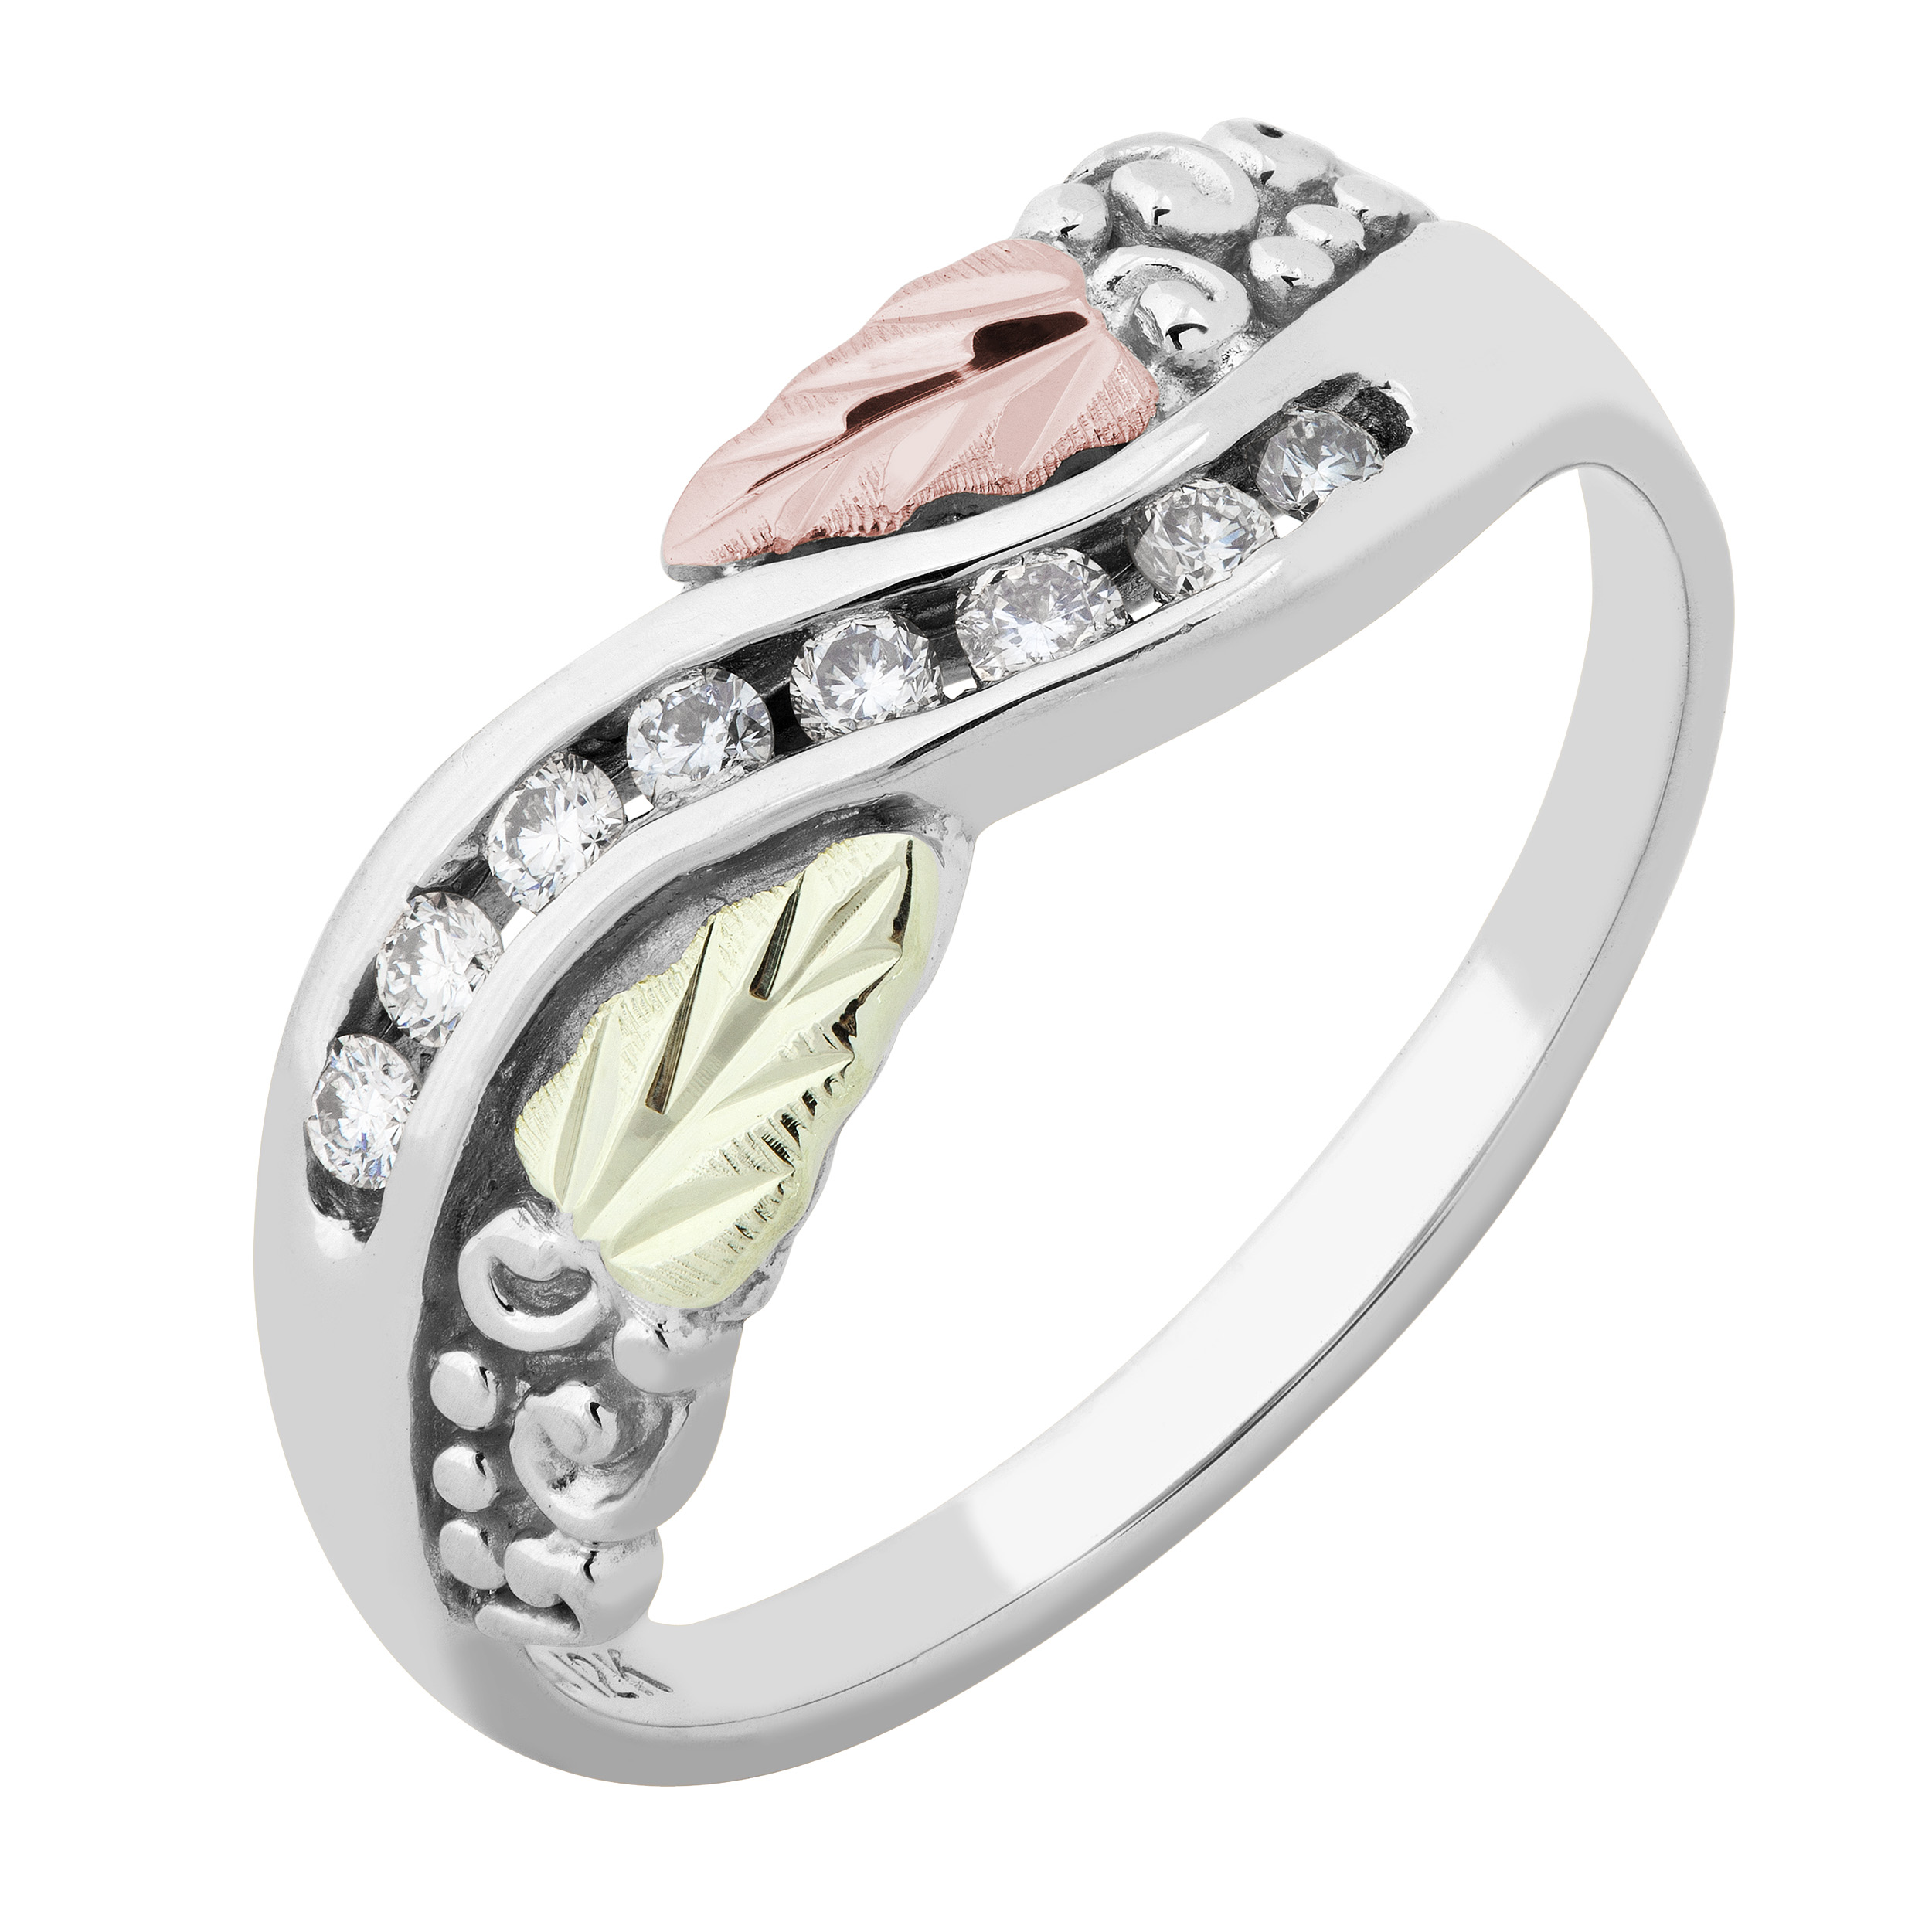 Channel-Set Diamond Ring, Sterling Silver, 12k Green and Rose Gold Black Hills Gold Motif (.16 Ctw,    Color,    Clarity)